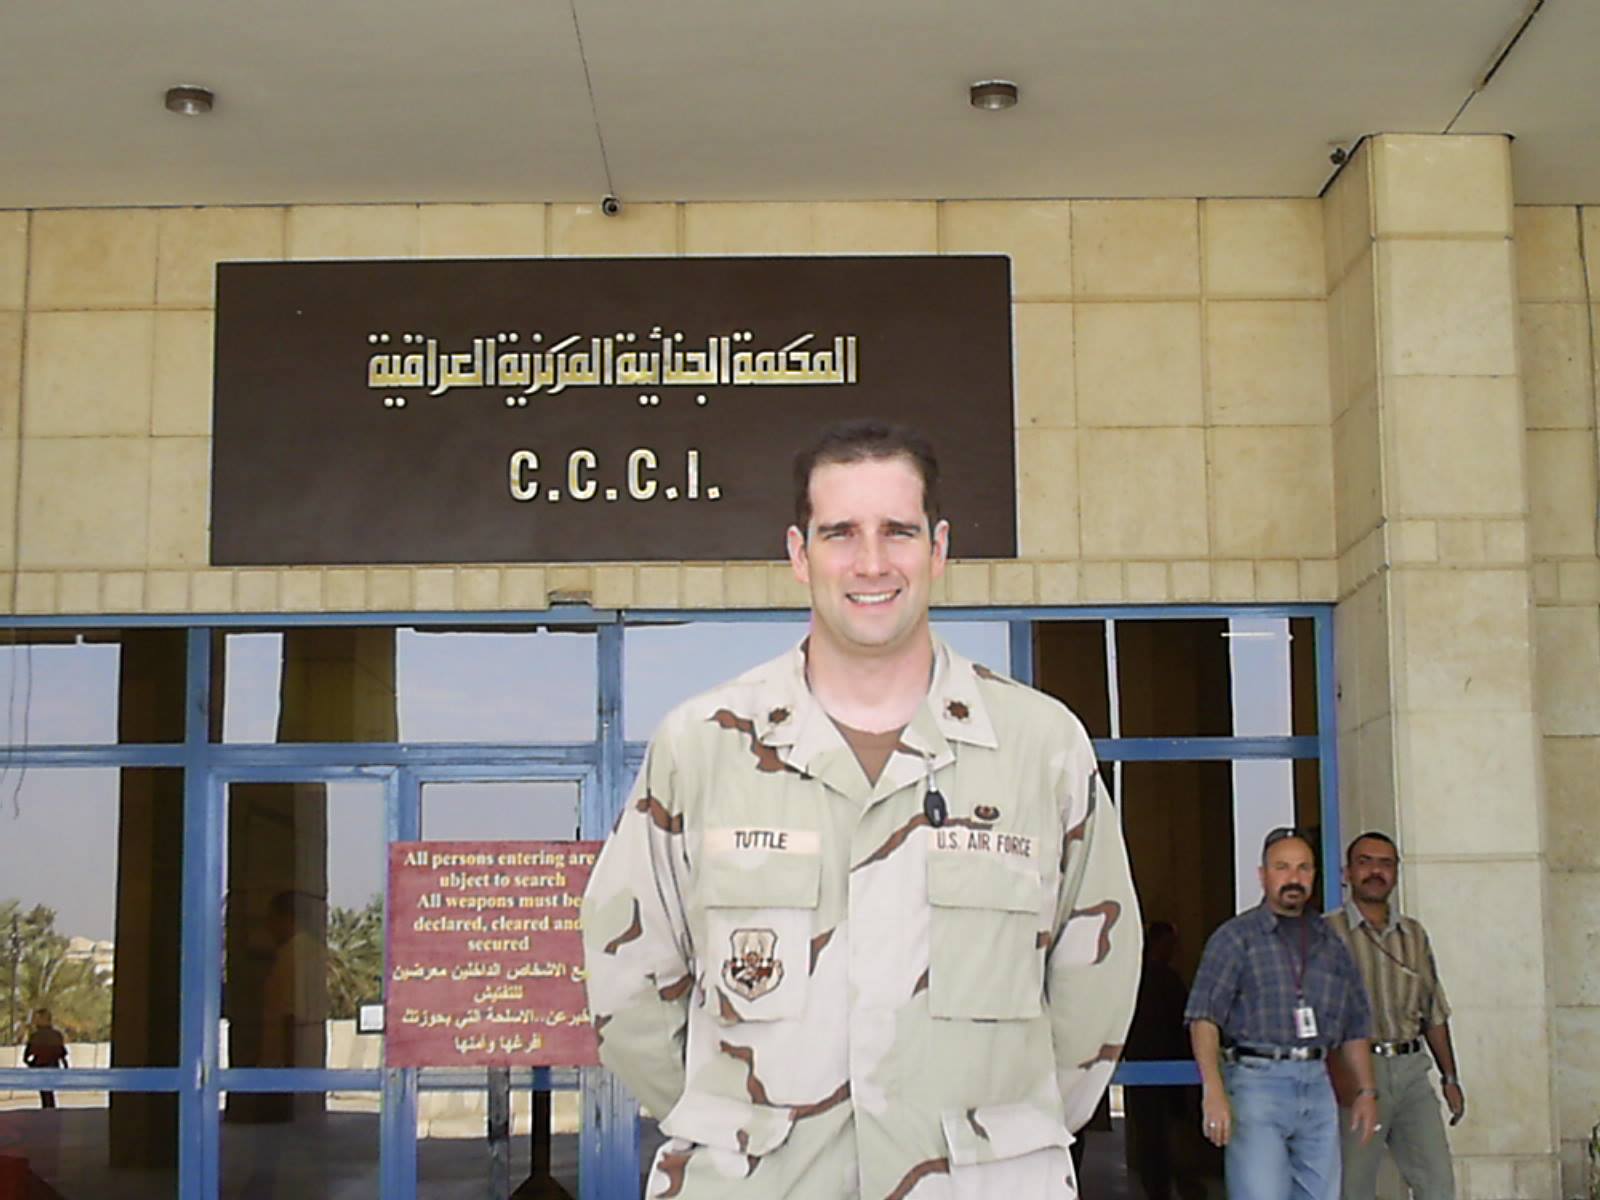 Tim Tuttle standing in uniform in front of a building